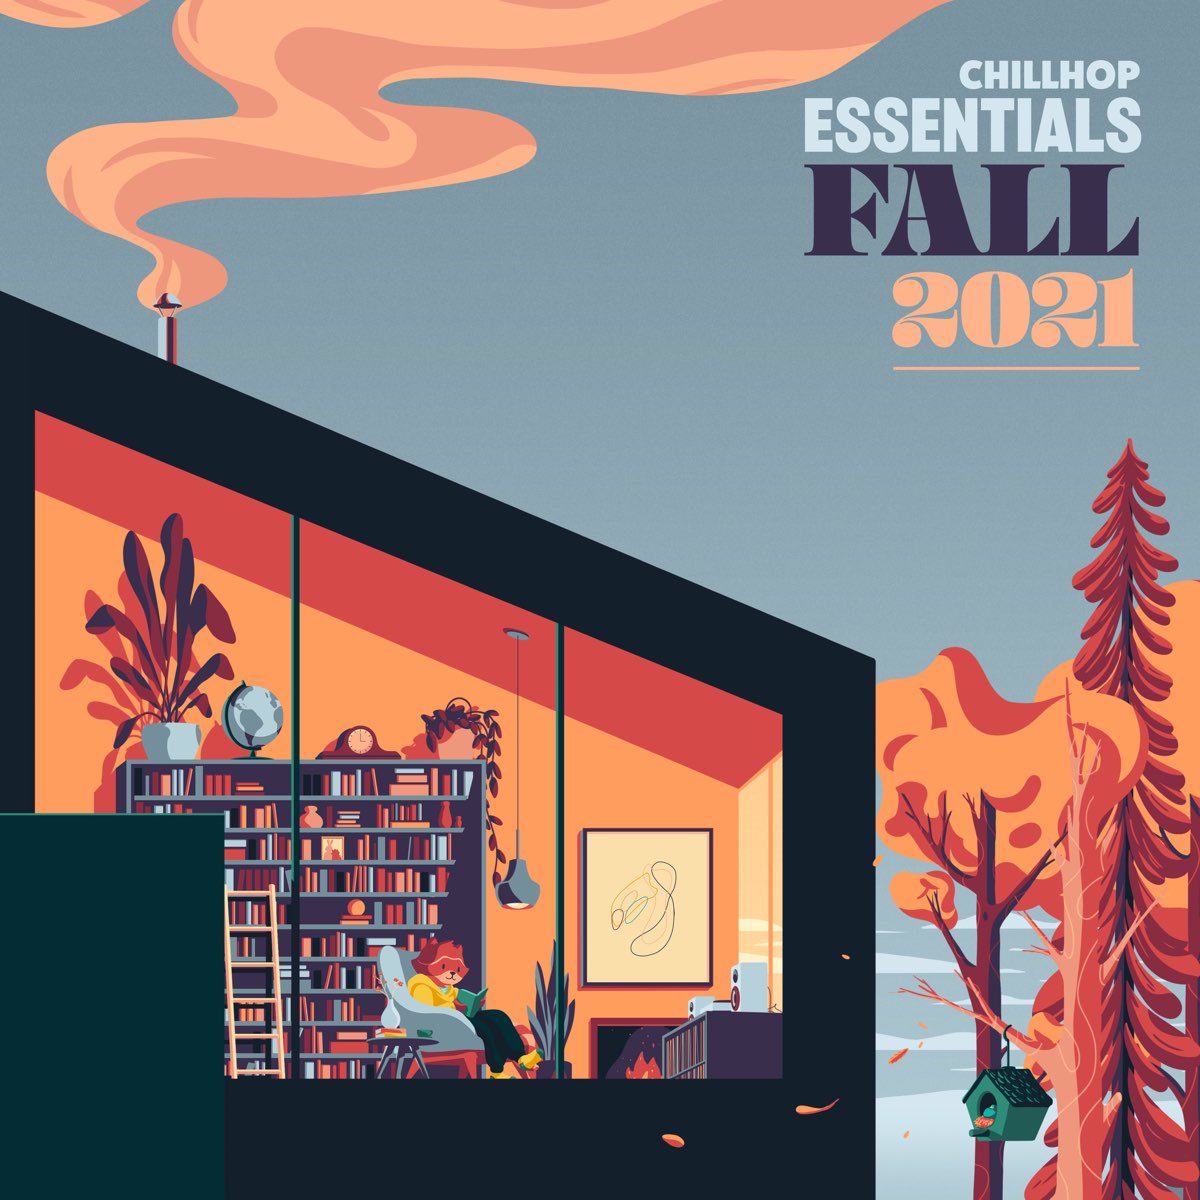 ‎Chillhop Essentials Fall 2021 by Various Artists on Apple Music